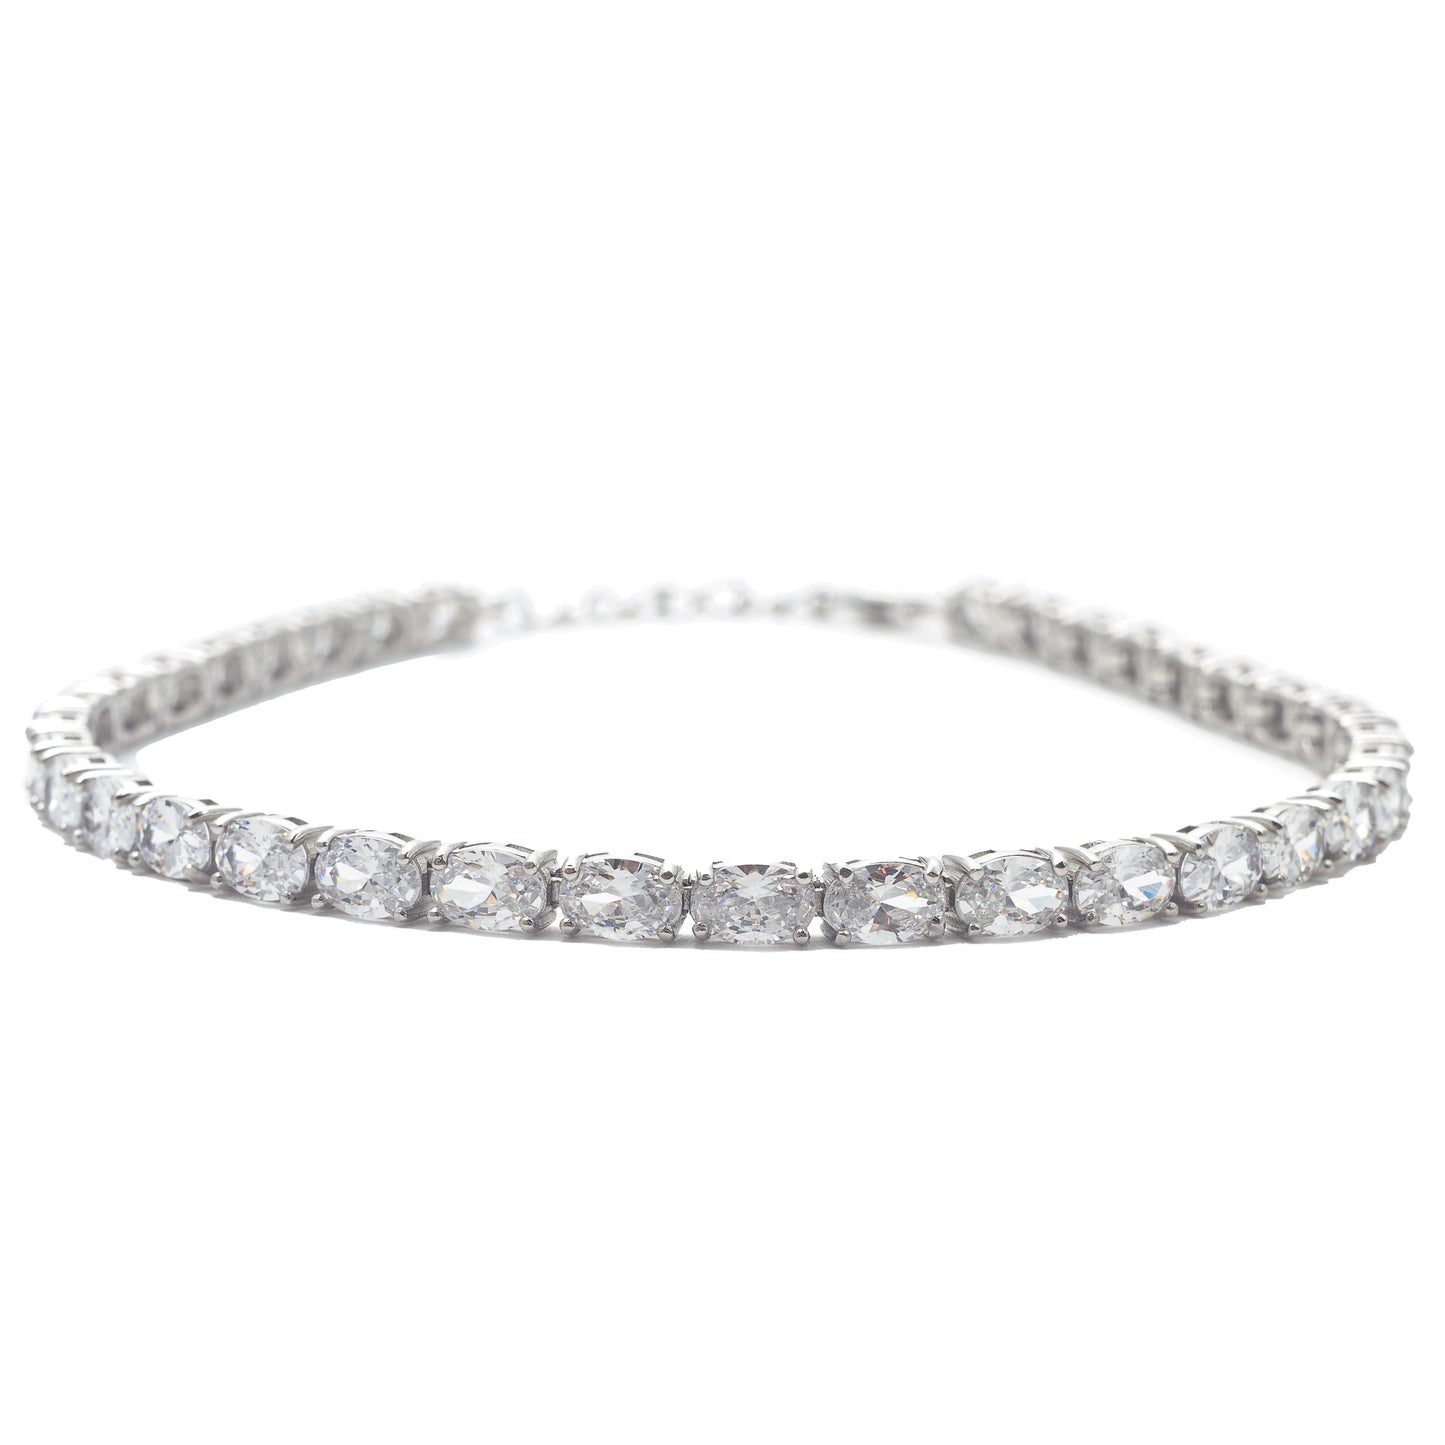 ICY OVAL ANKLET